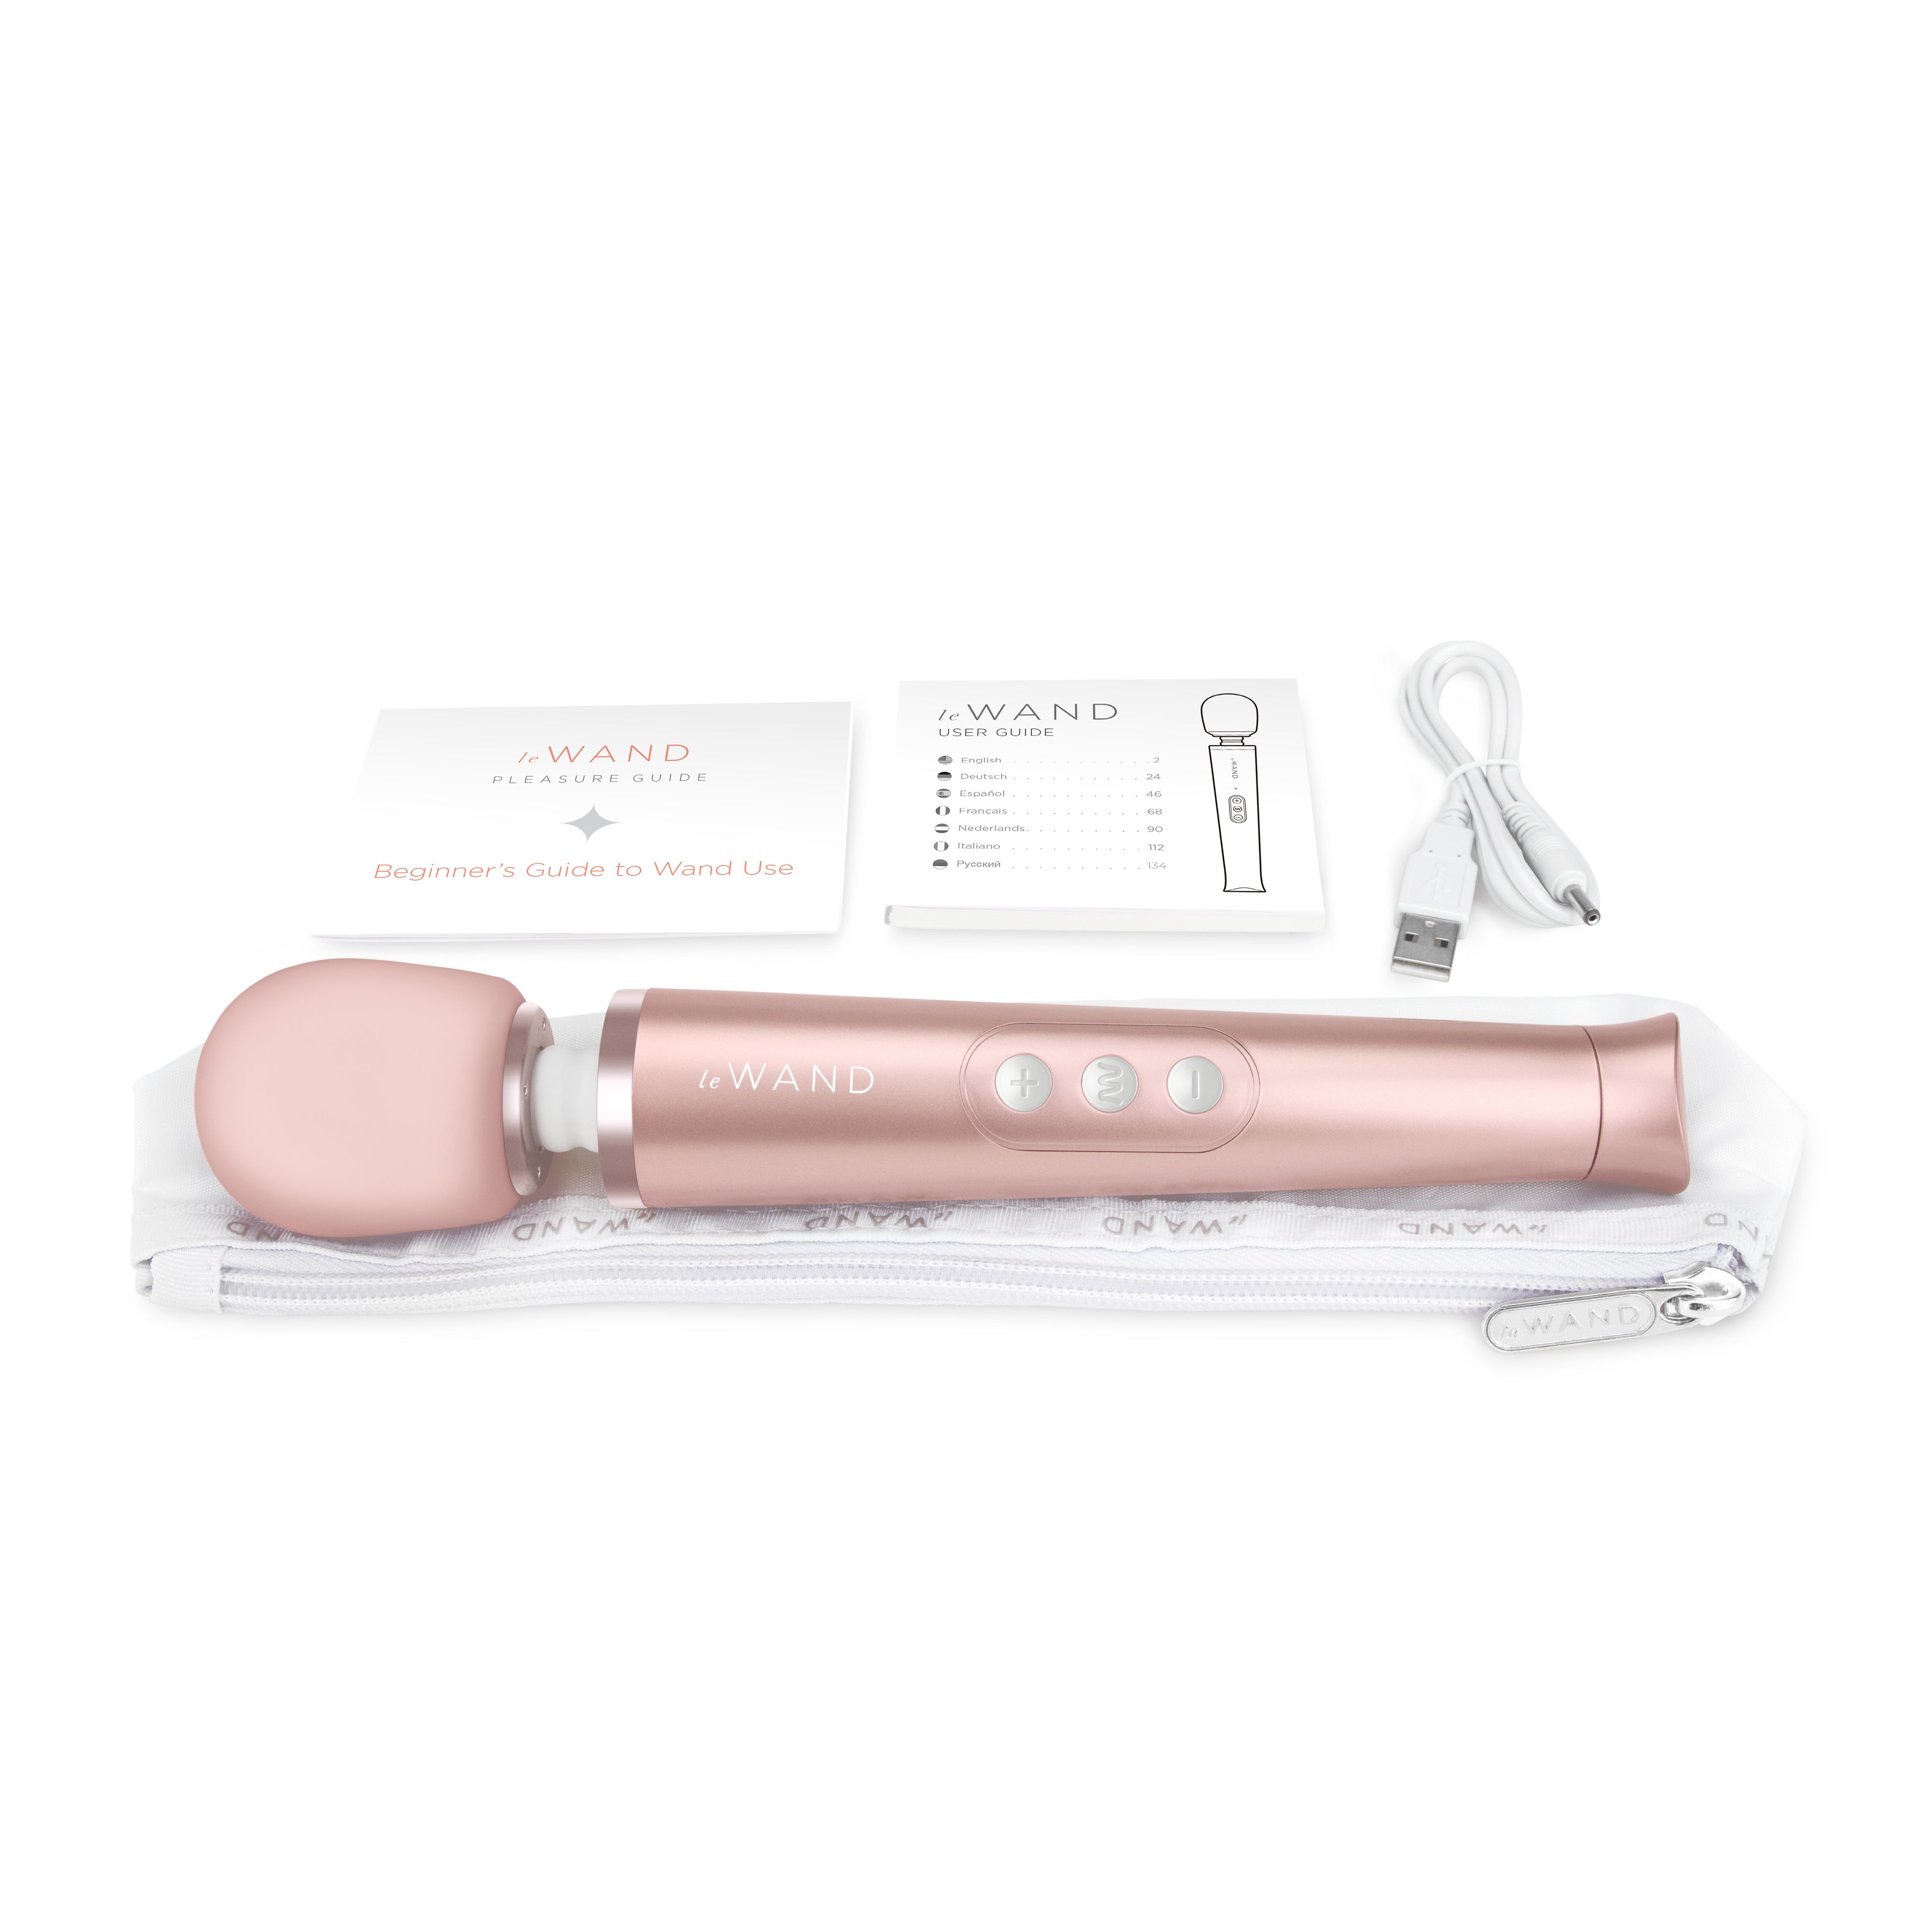 Le Wand petite rose gold with package contents